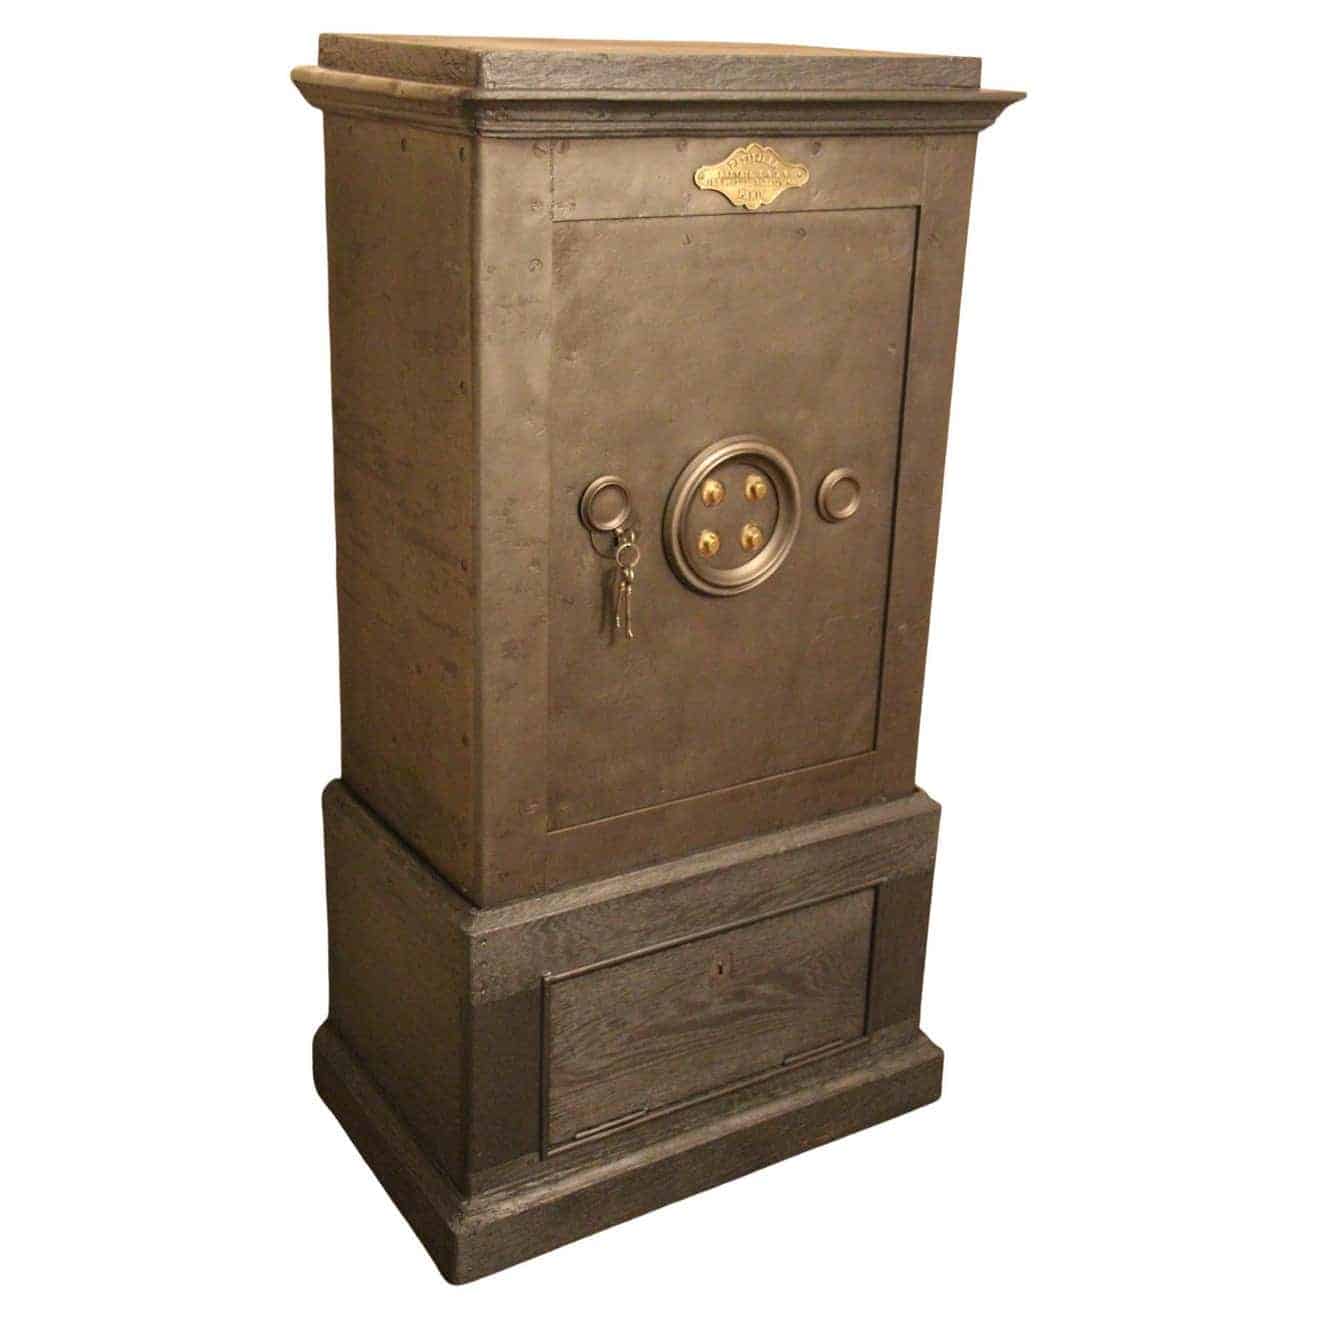 Drink cabinet with black iron, steel, and wood safe